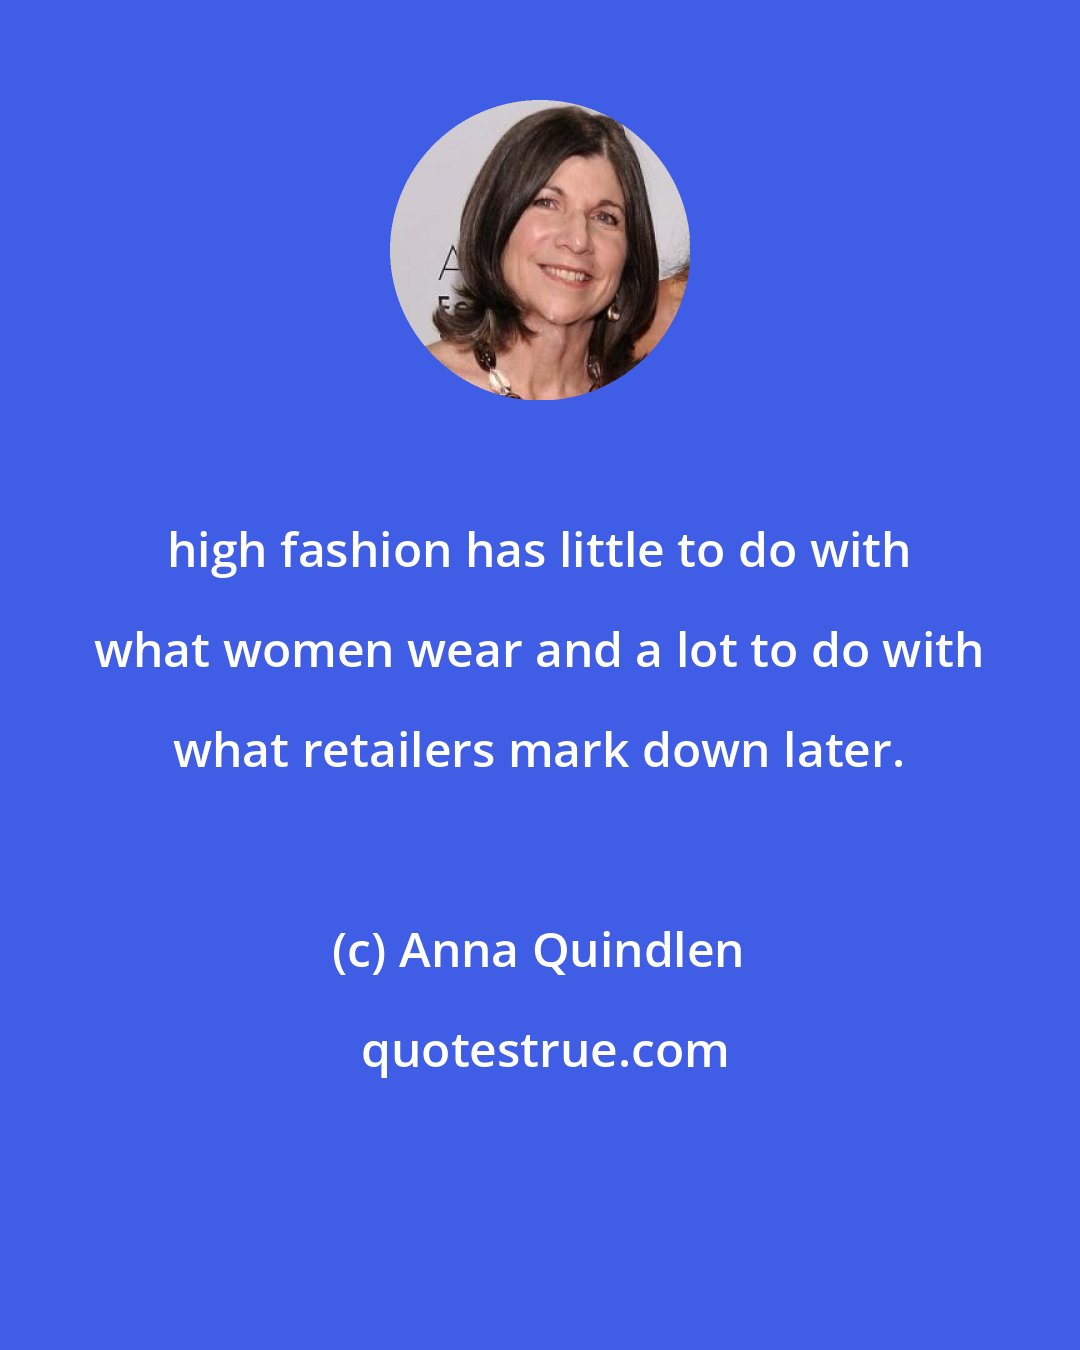 Anna Quindlen: high fashion has little to do with what women wear and a lot to do with what retailers mark down later.